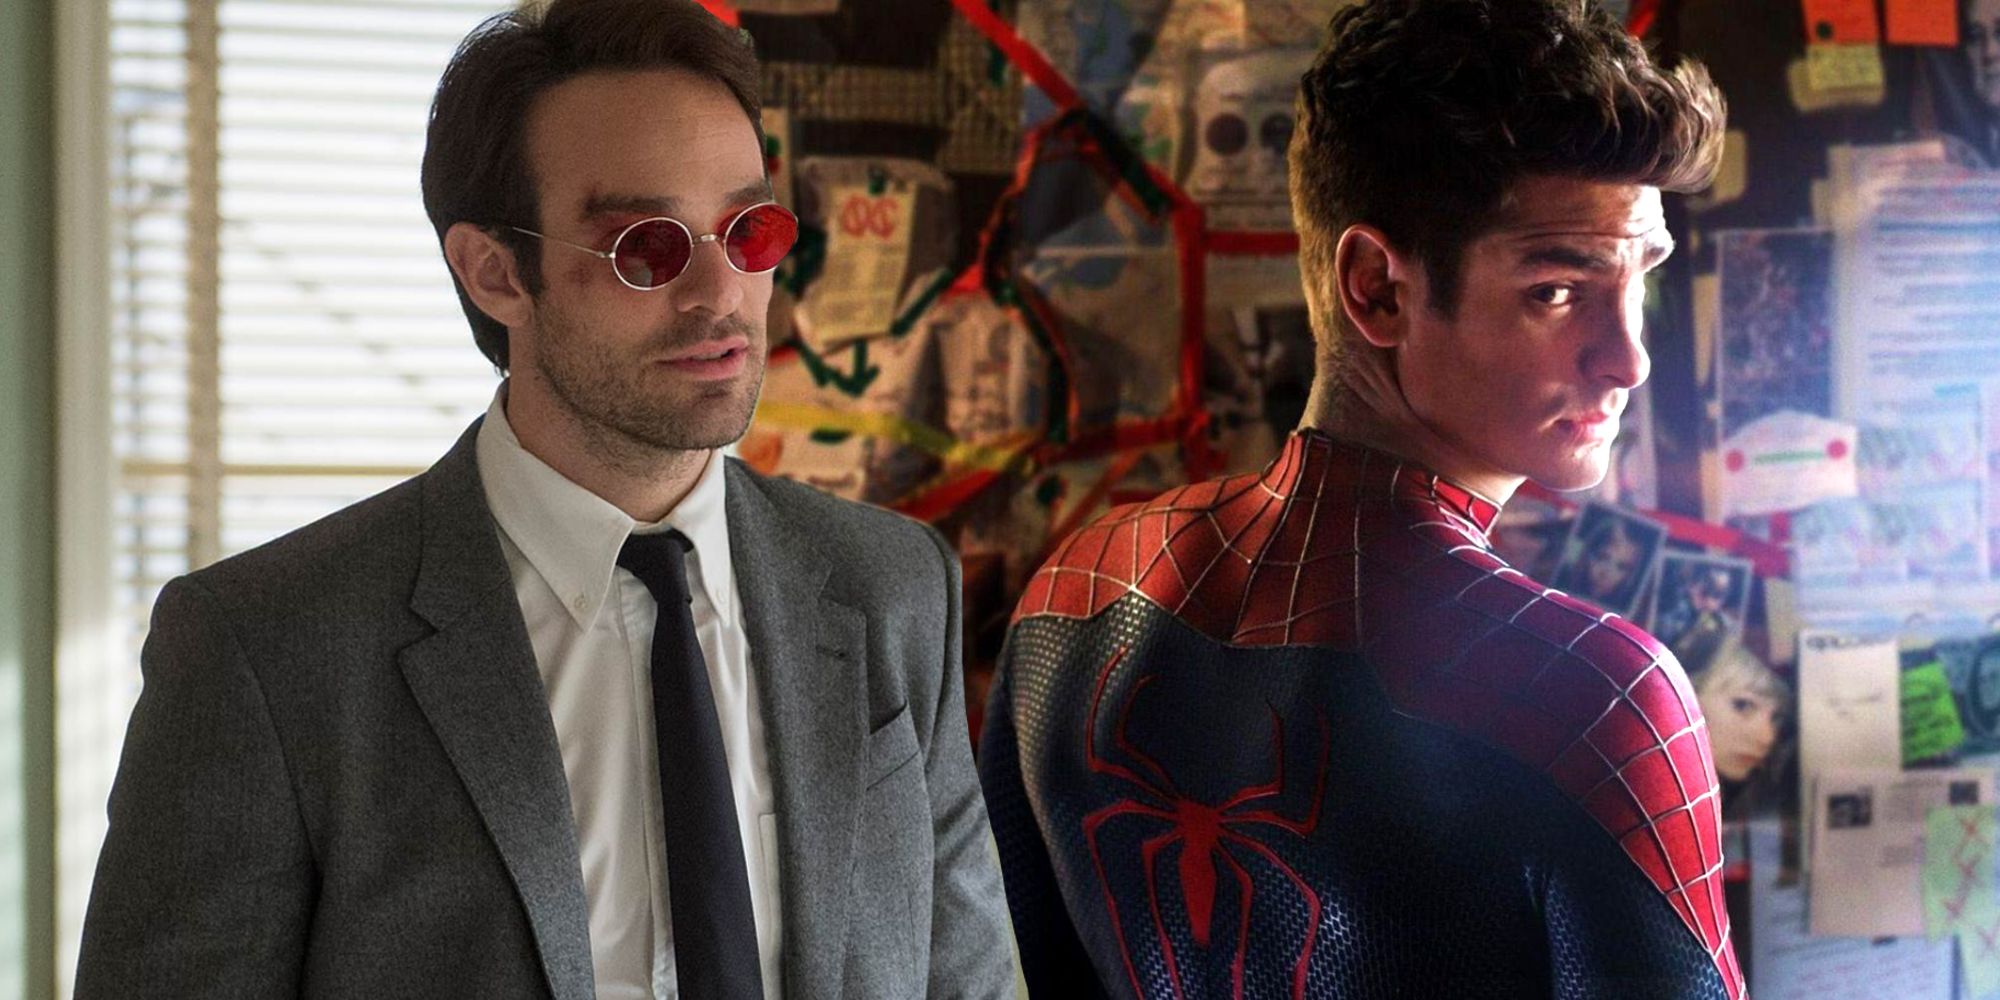 Andrew Garfield Reacts To Charlie Cox Mocking His Spider-Man In Video